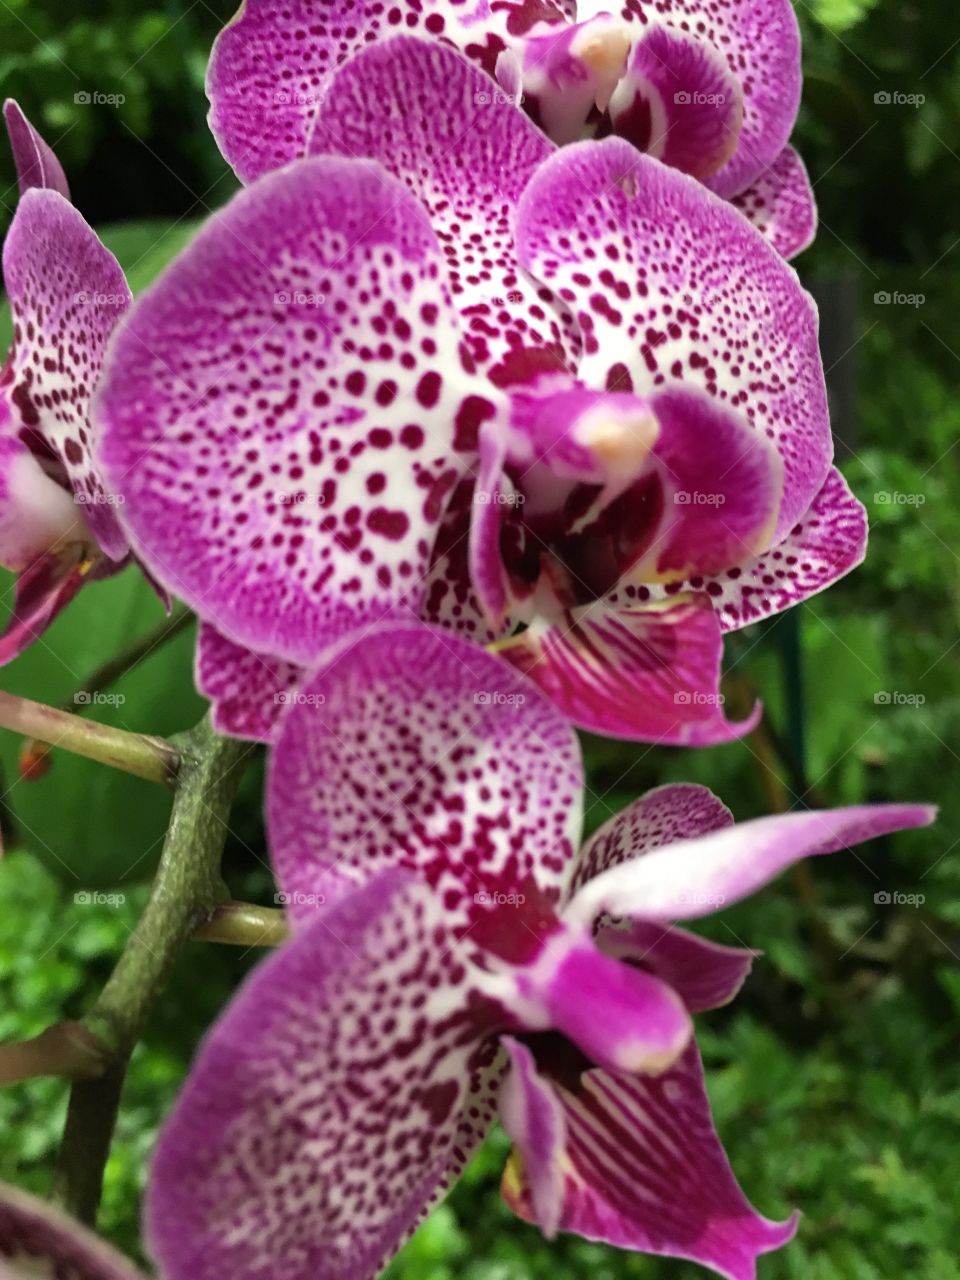 Purple and white orchids wit spots